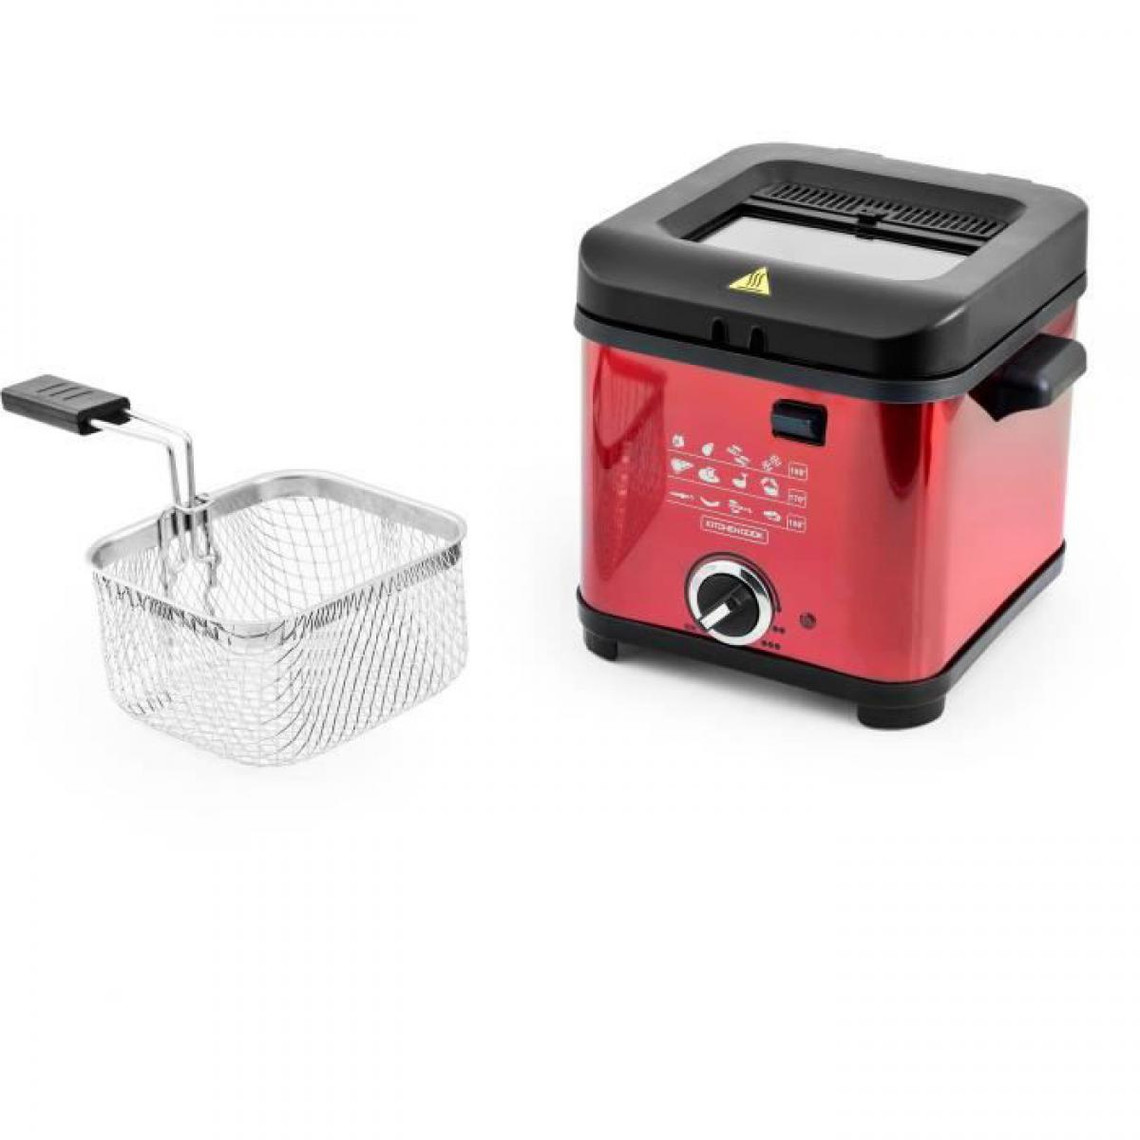 Kitchencook KITCHENCOOK - FR1010_RED - Friteuse - 900W - 1,5L - Rouge